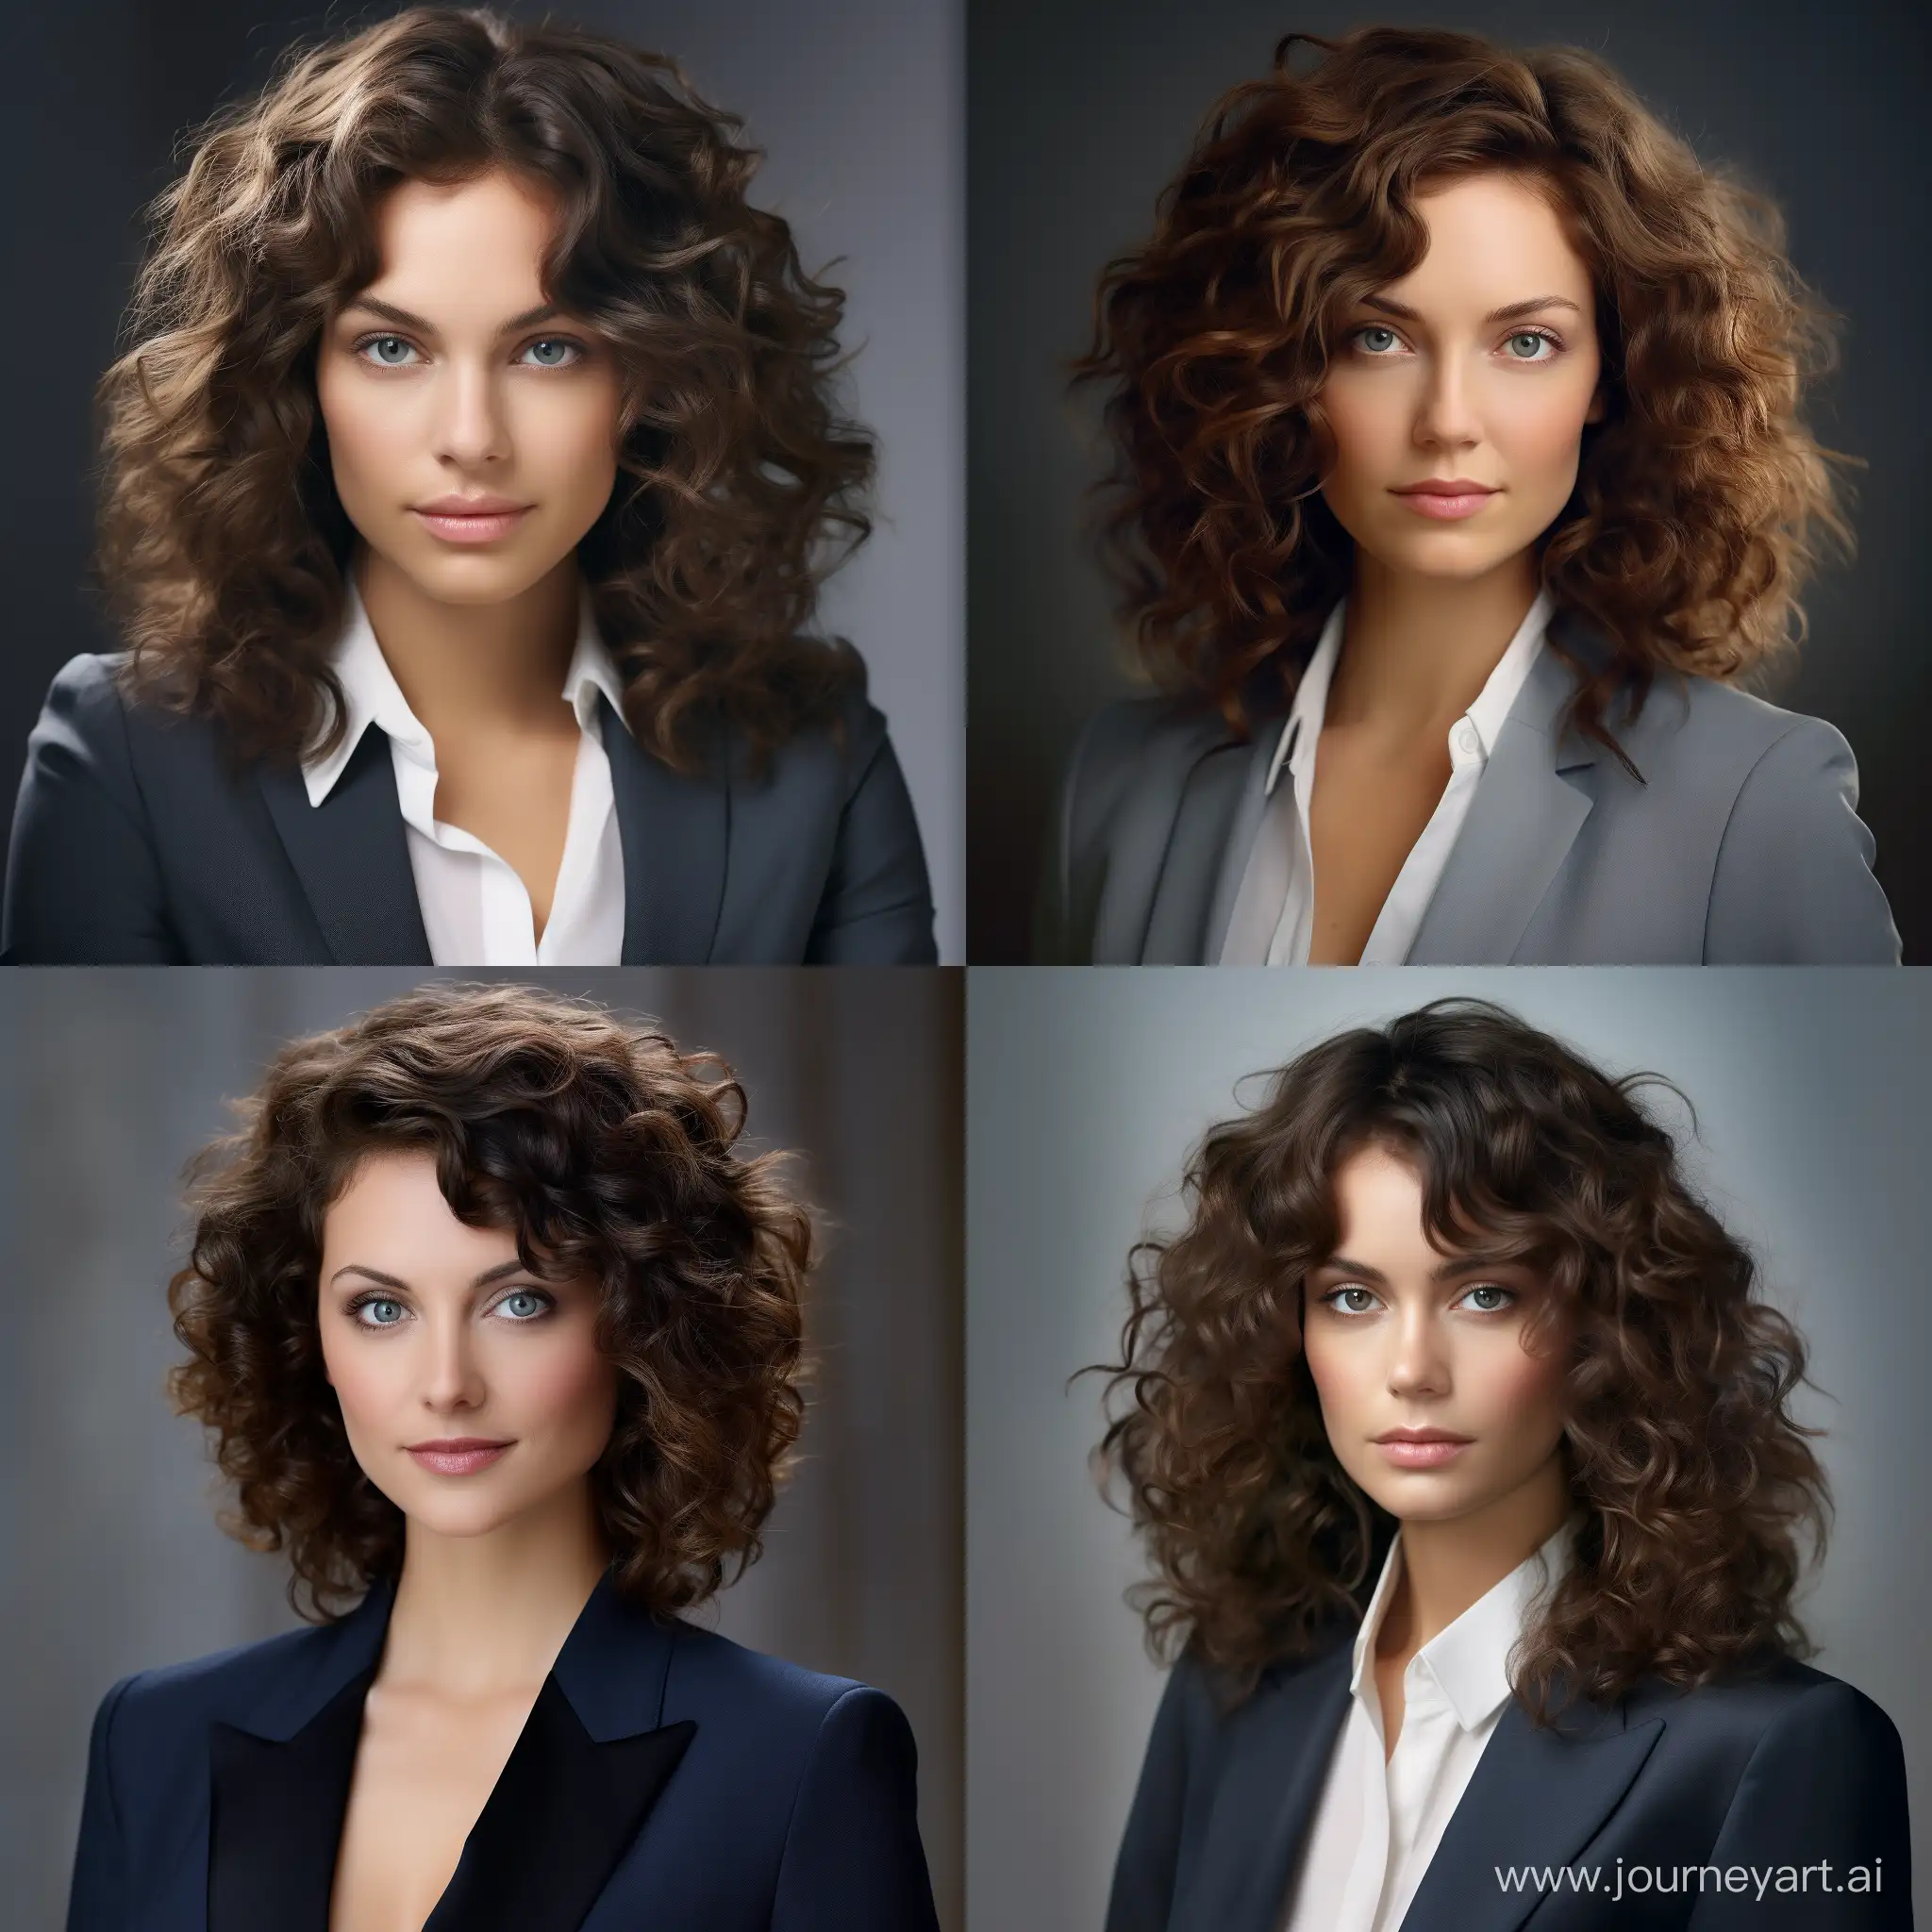 Professional-Business-Woman-with-Dark-Brown-Curly-Hair-in-Photorealistic-Portrait